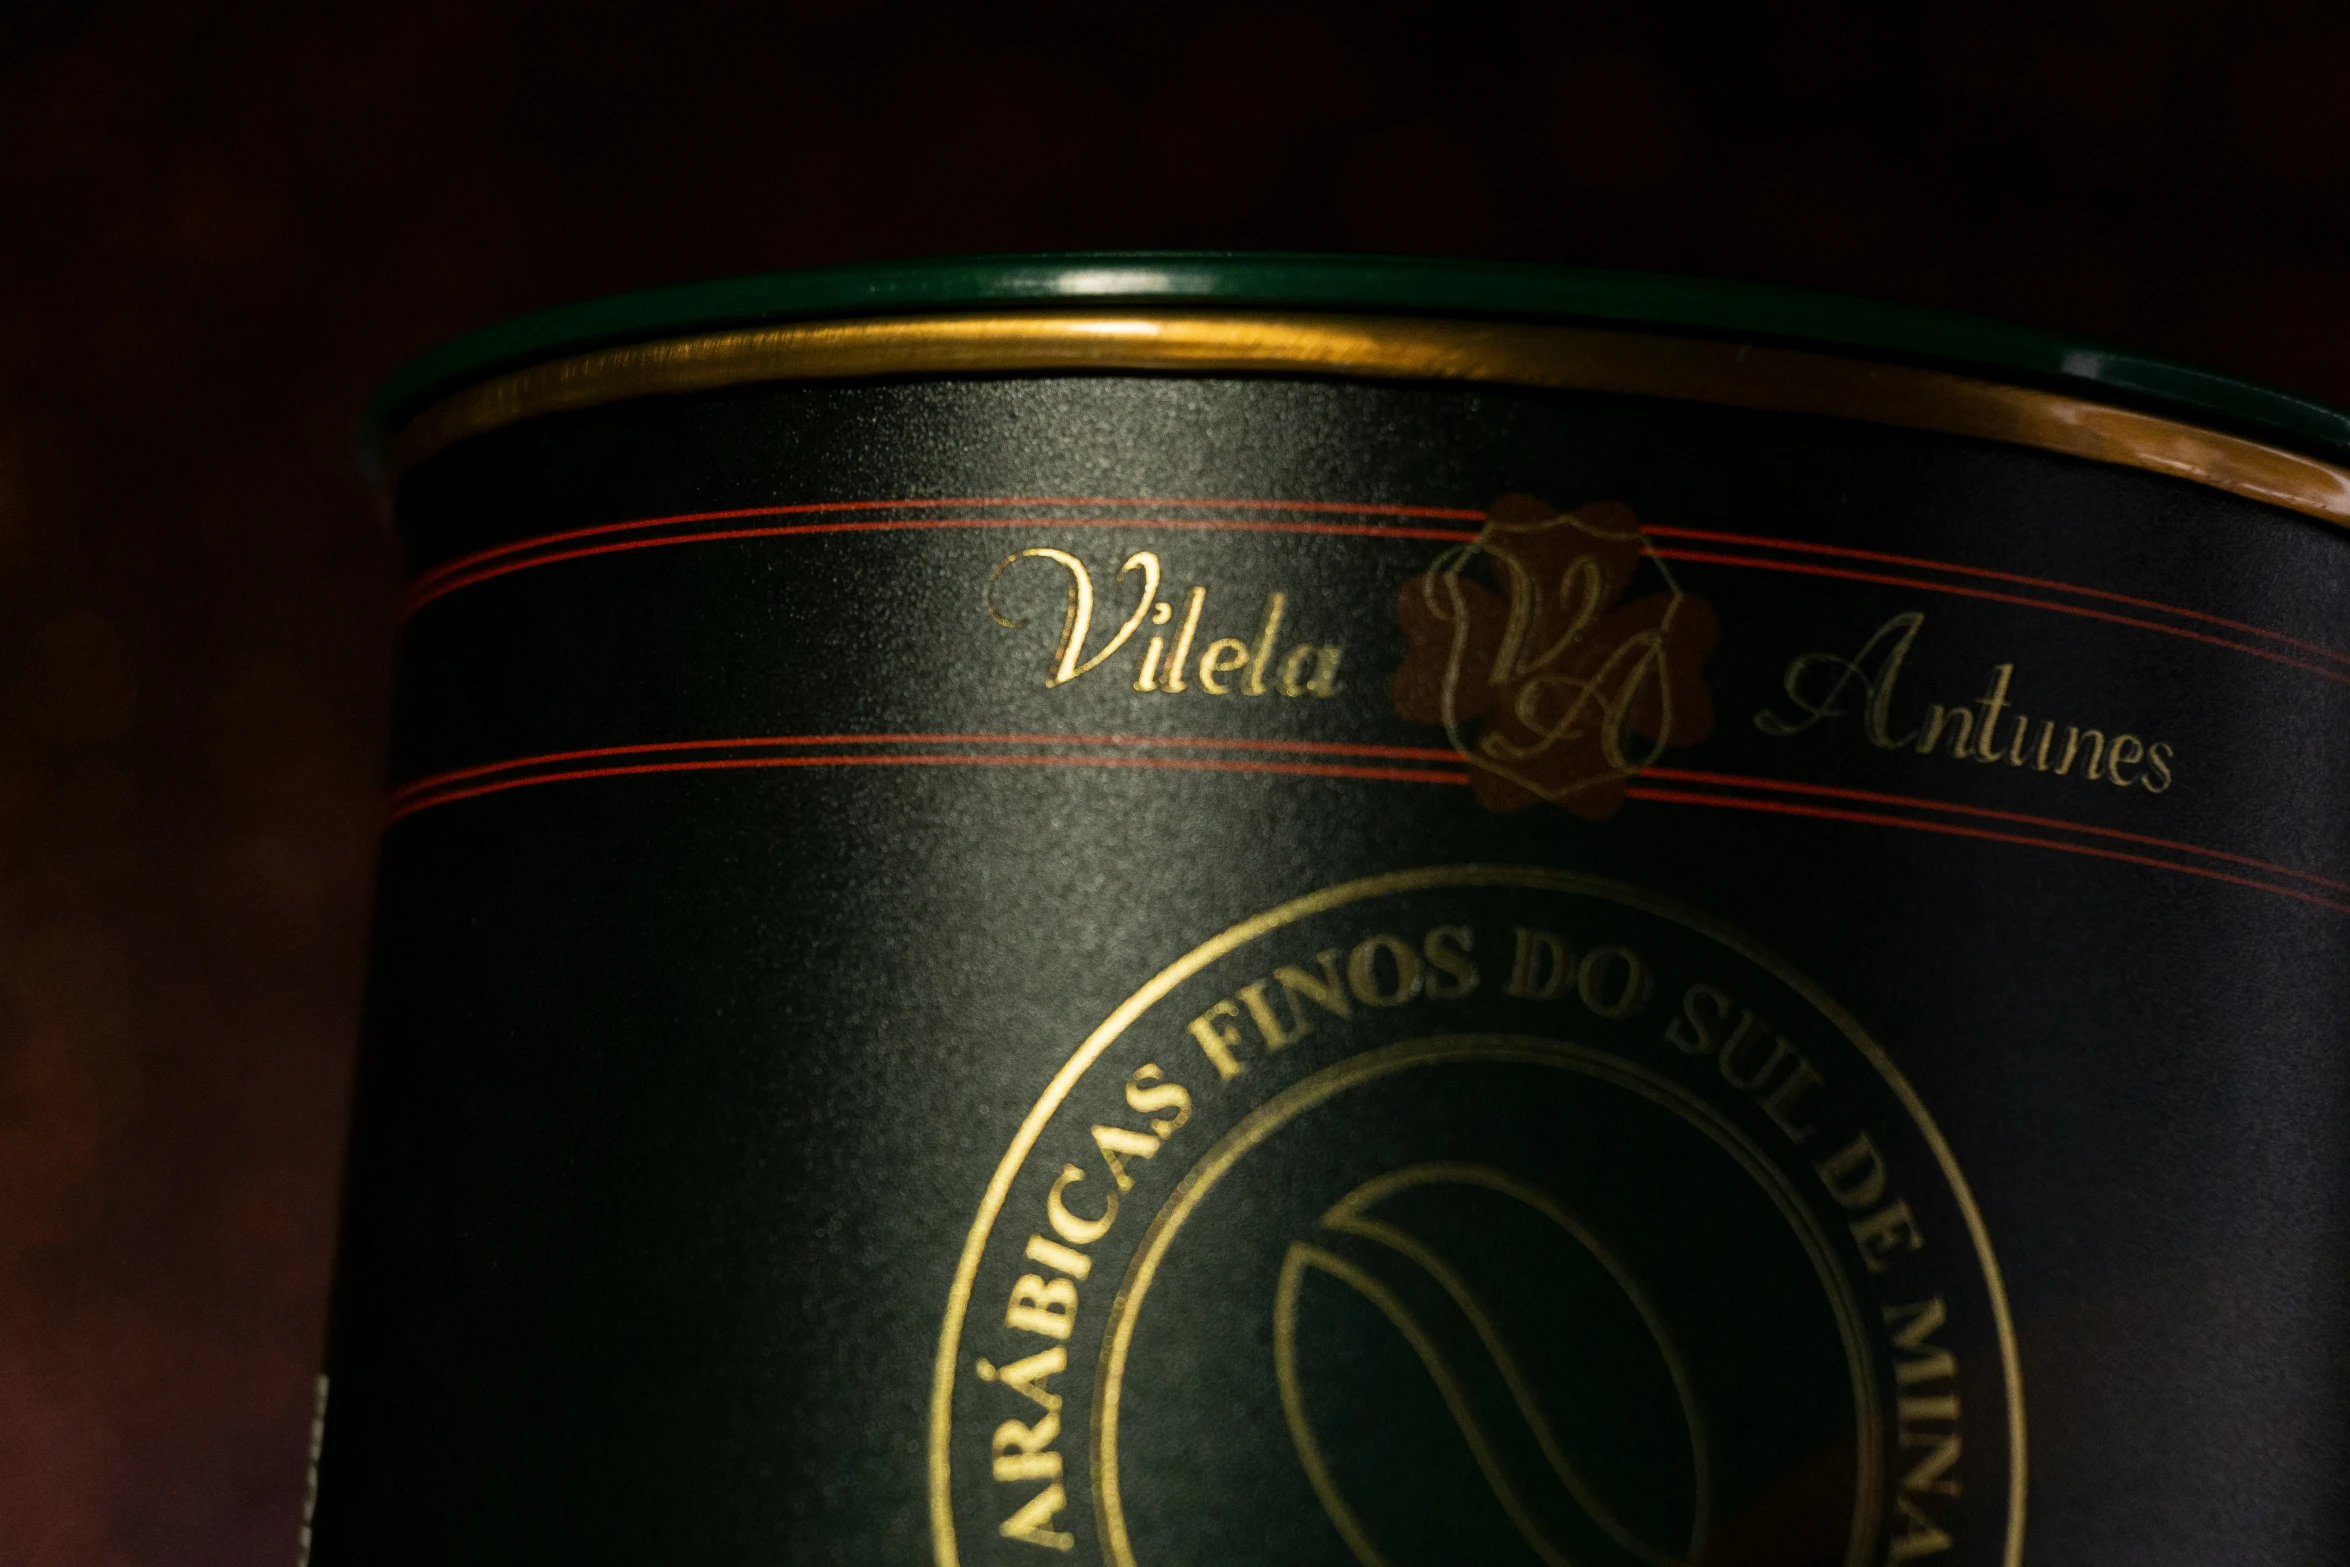 the back side of a can of wine on display